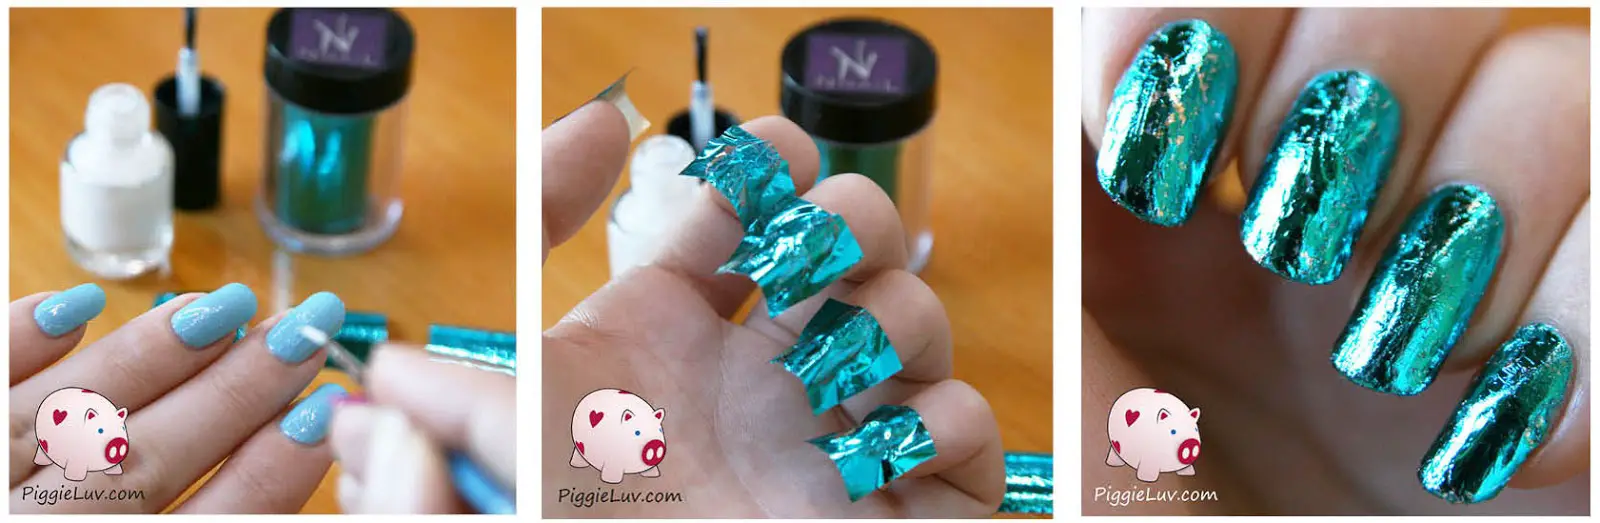 How To Apply Nail Foils Without Glue